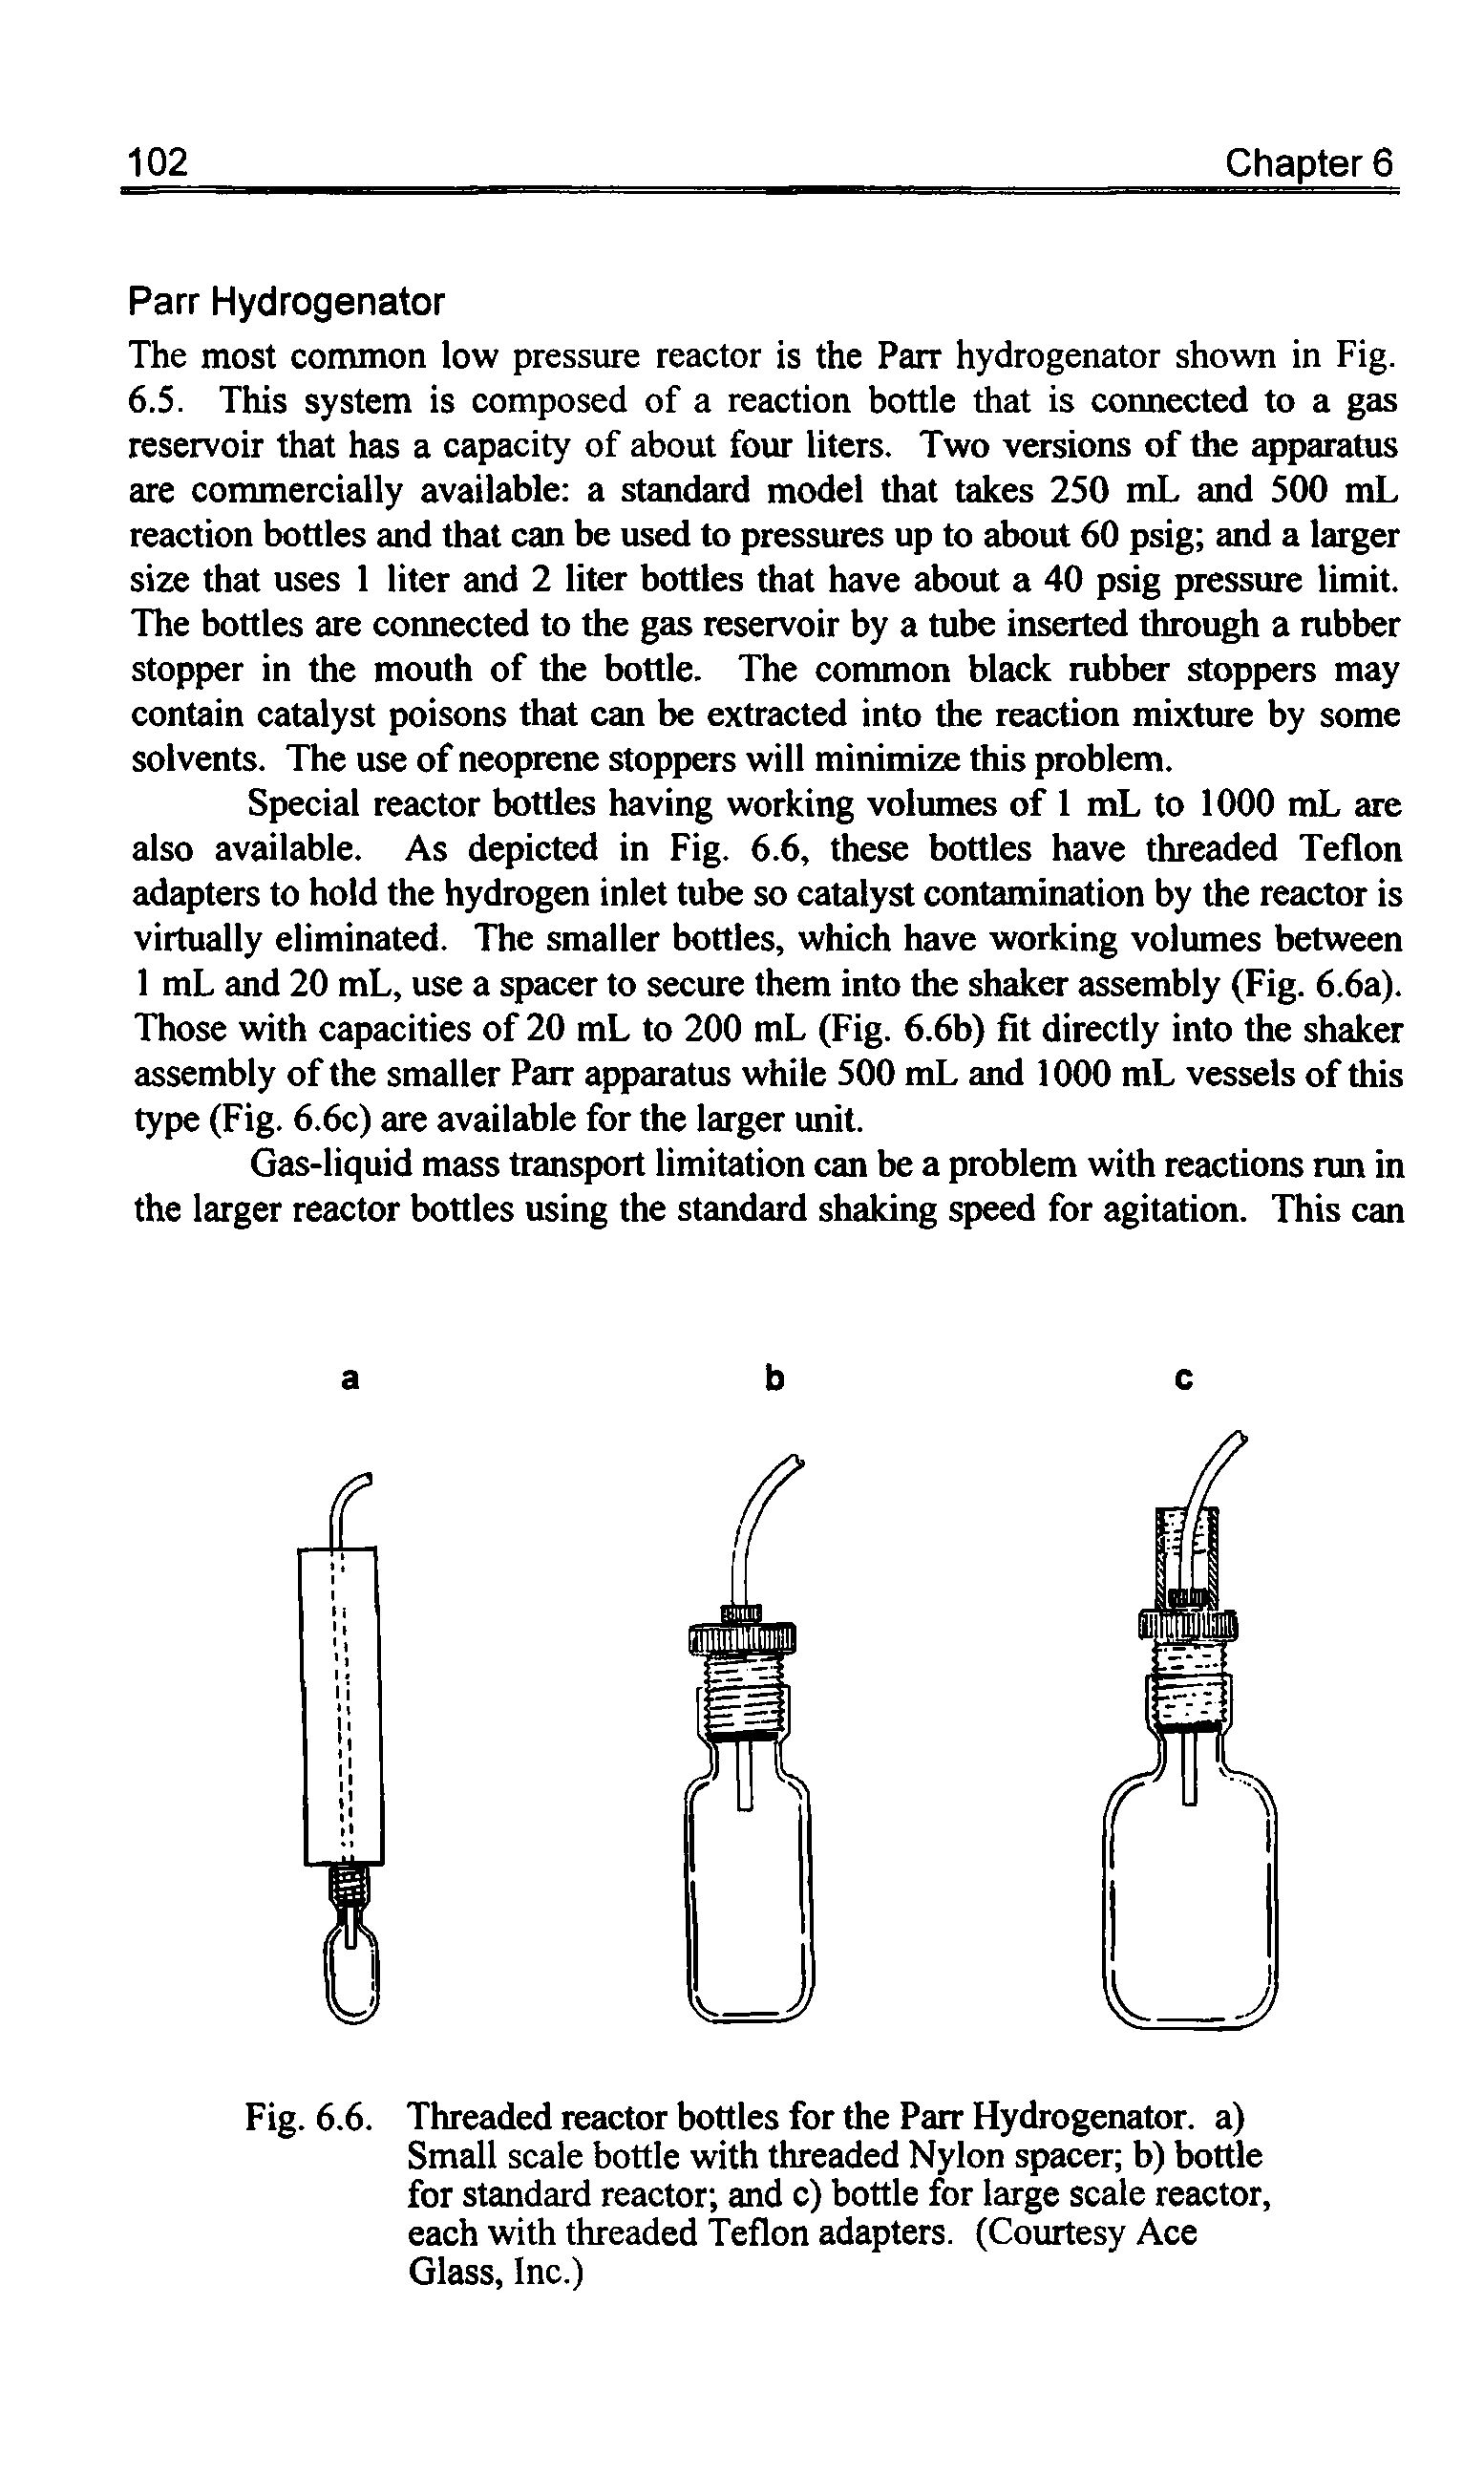 Fig. 6.6. Threaded reactor bottles for the Parr Hydrogenator. a) Small scale bottle with threaded Nylon spacer b) bottle for standard reactor and c) bottle for large scale reactor, each with threaded Teflon adapters. (Courtesy Ace Glass, Inc.)...